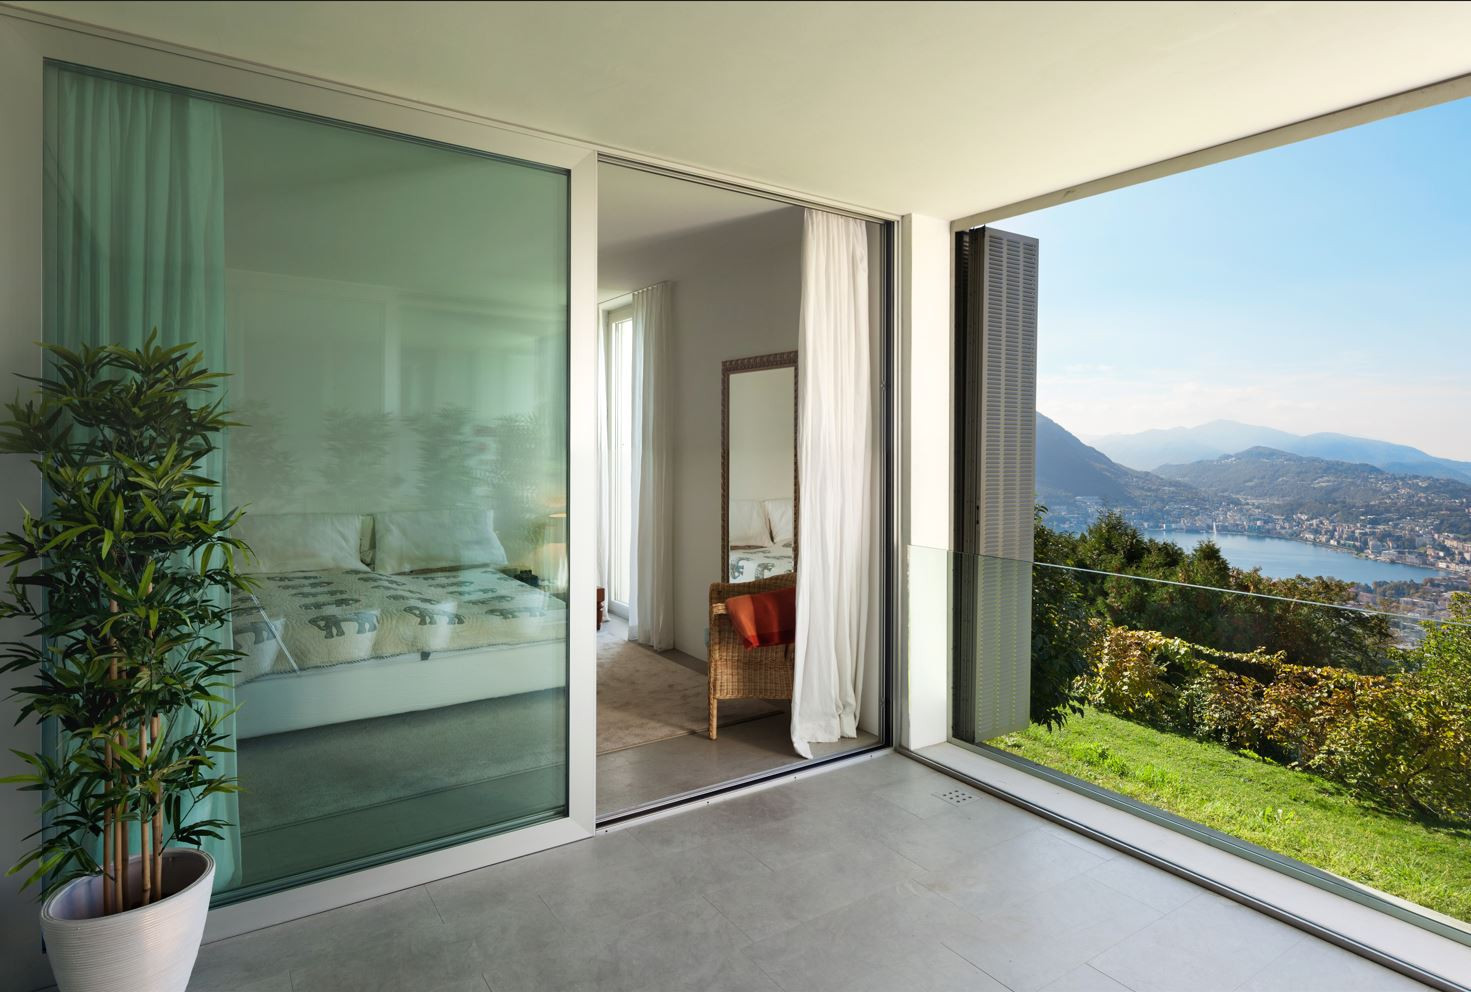 Glass sliding doors opening to a bedroom with a deck and glass balustrade, offering panoramic views of the ocean and mountains